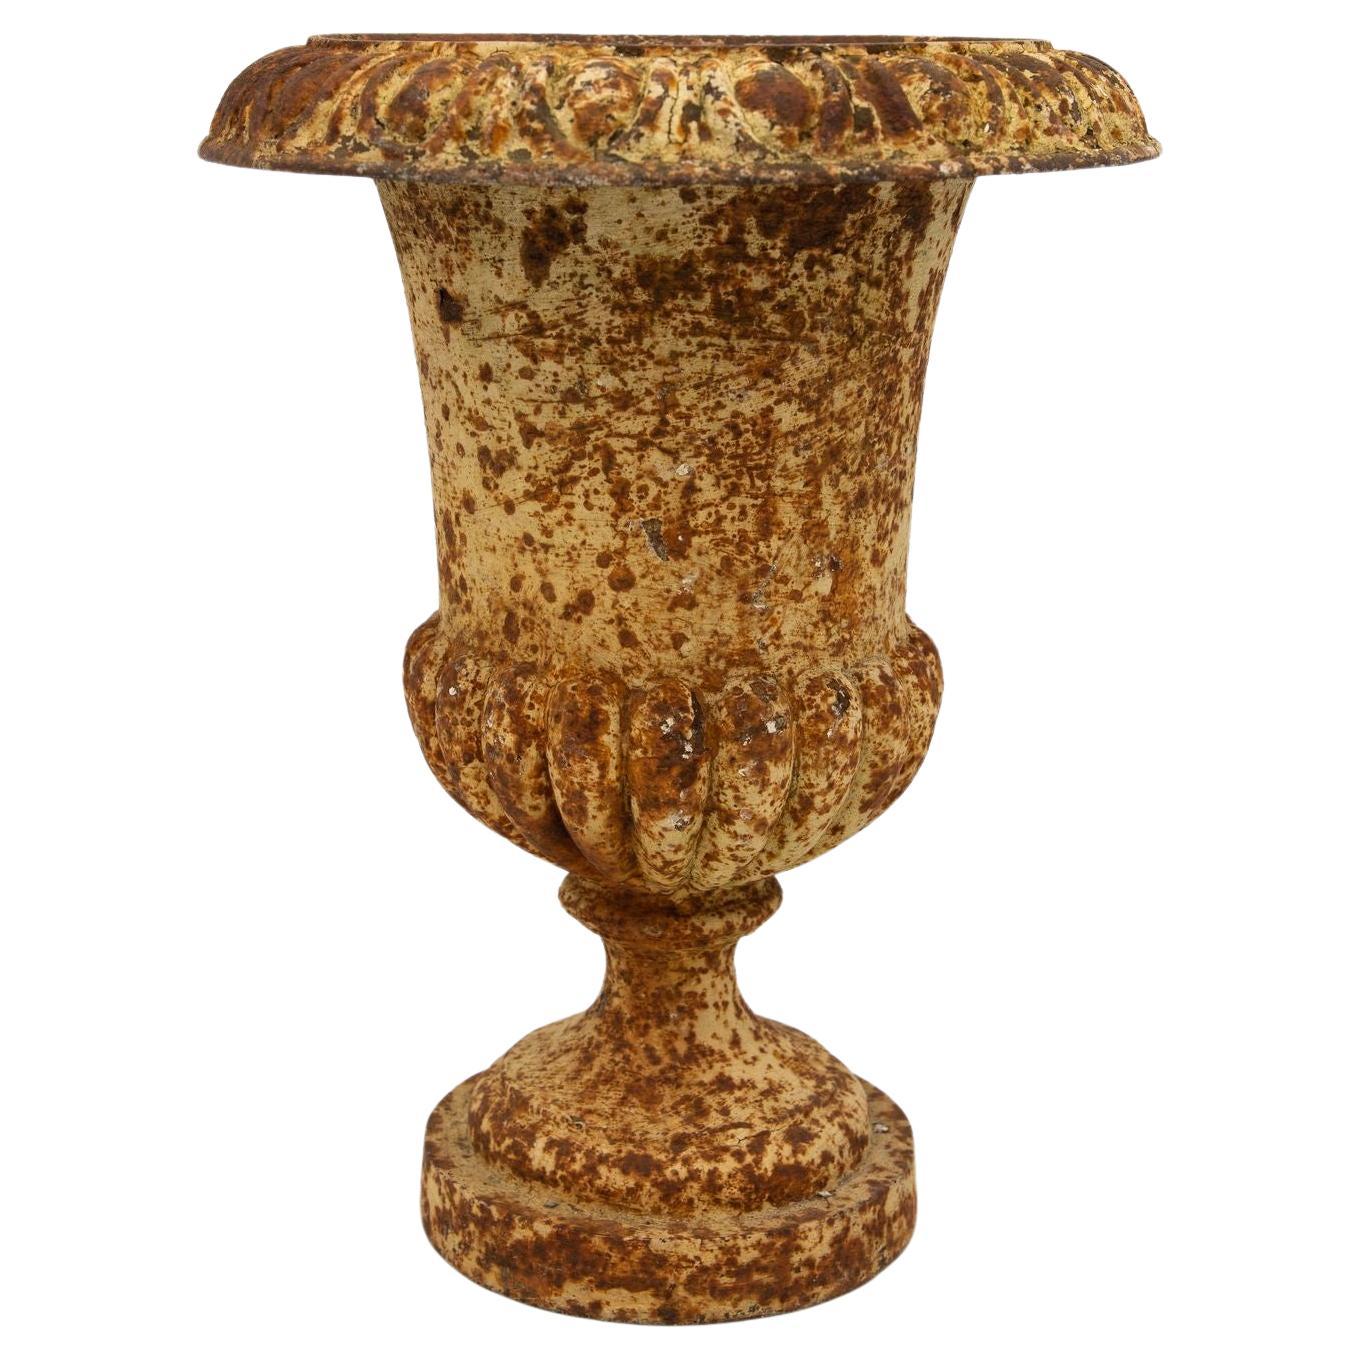 Single Rusty Cast Iron Urn, French early 20th Century